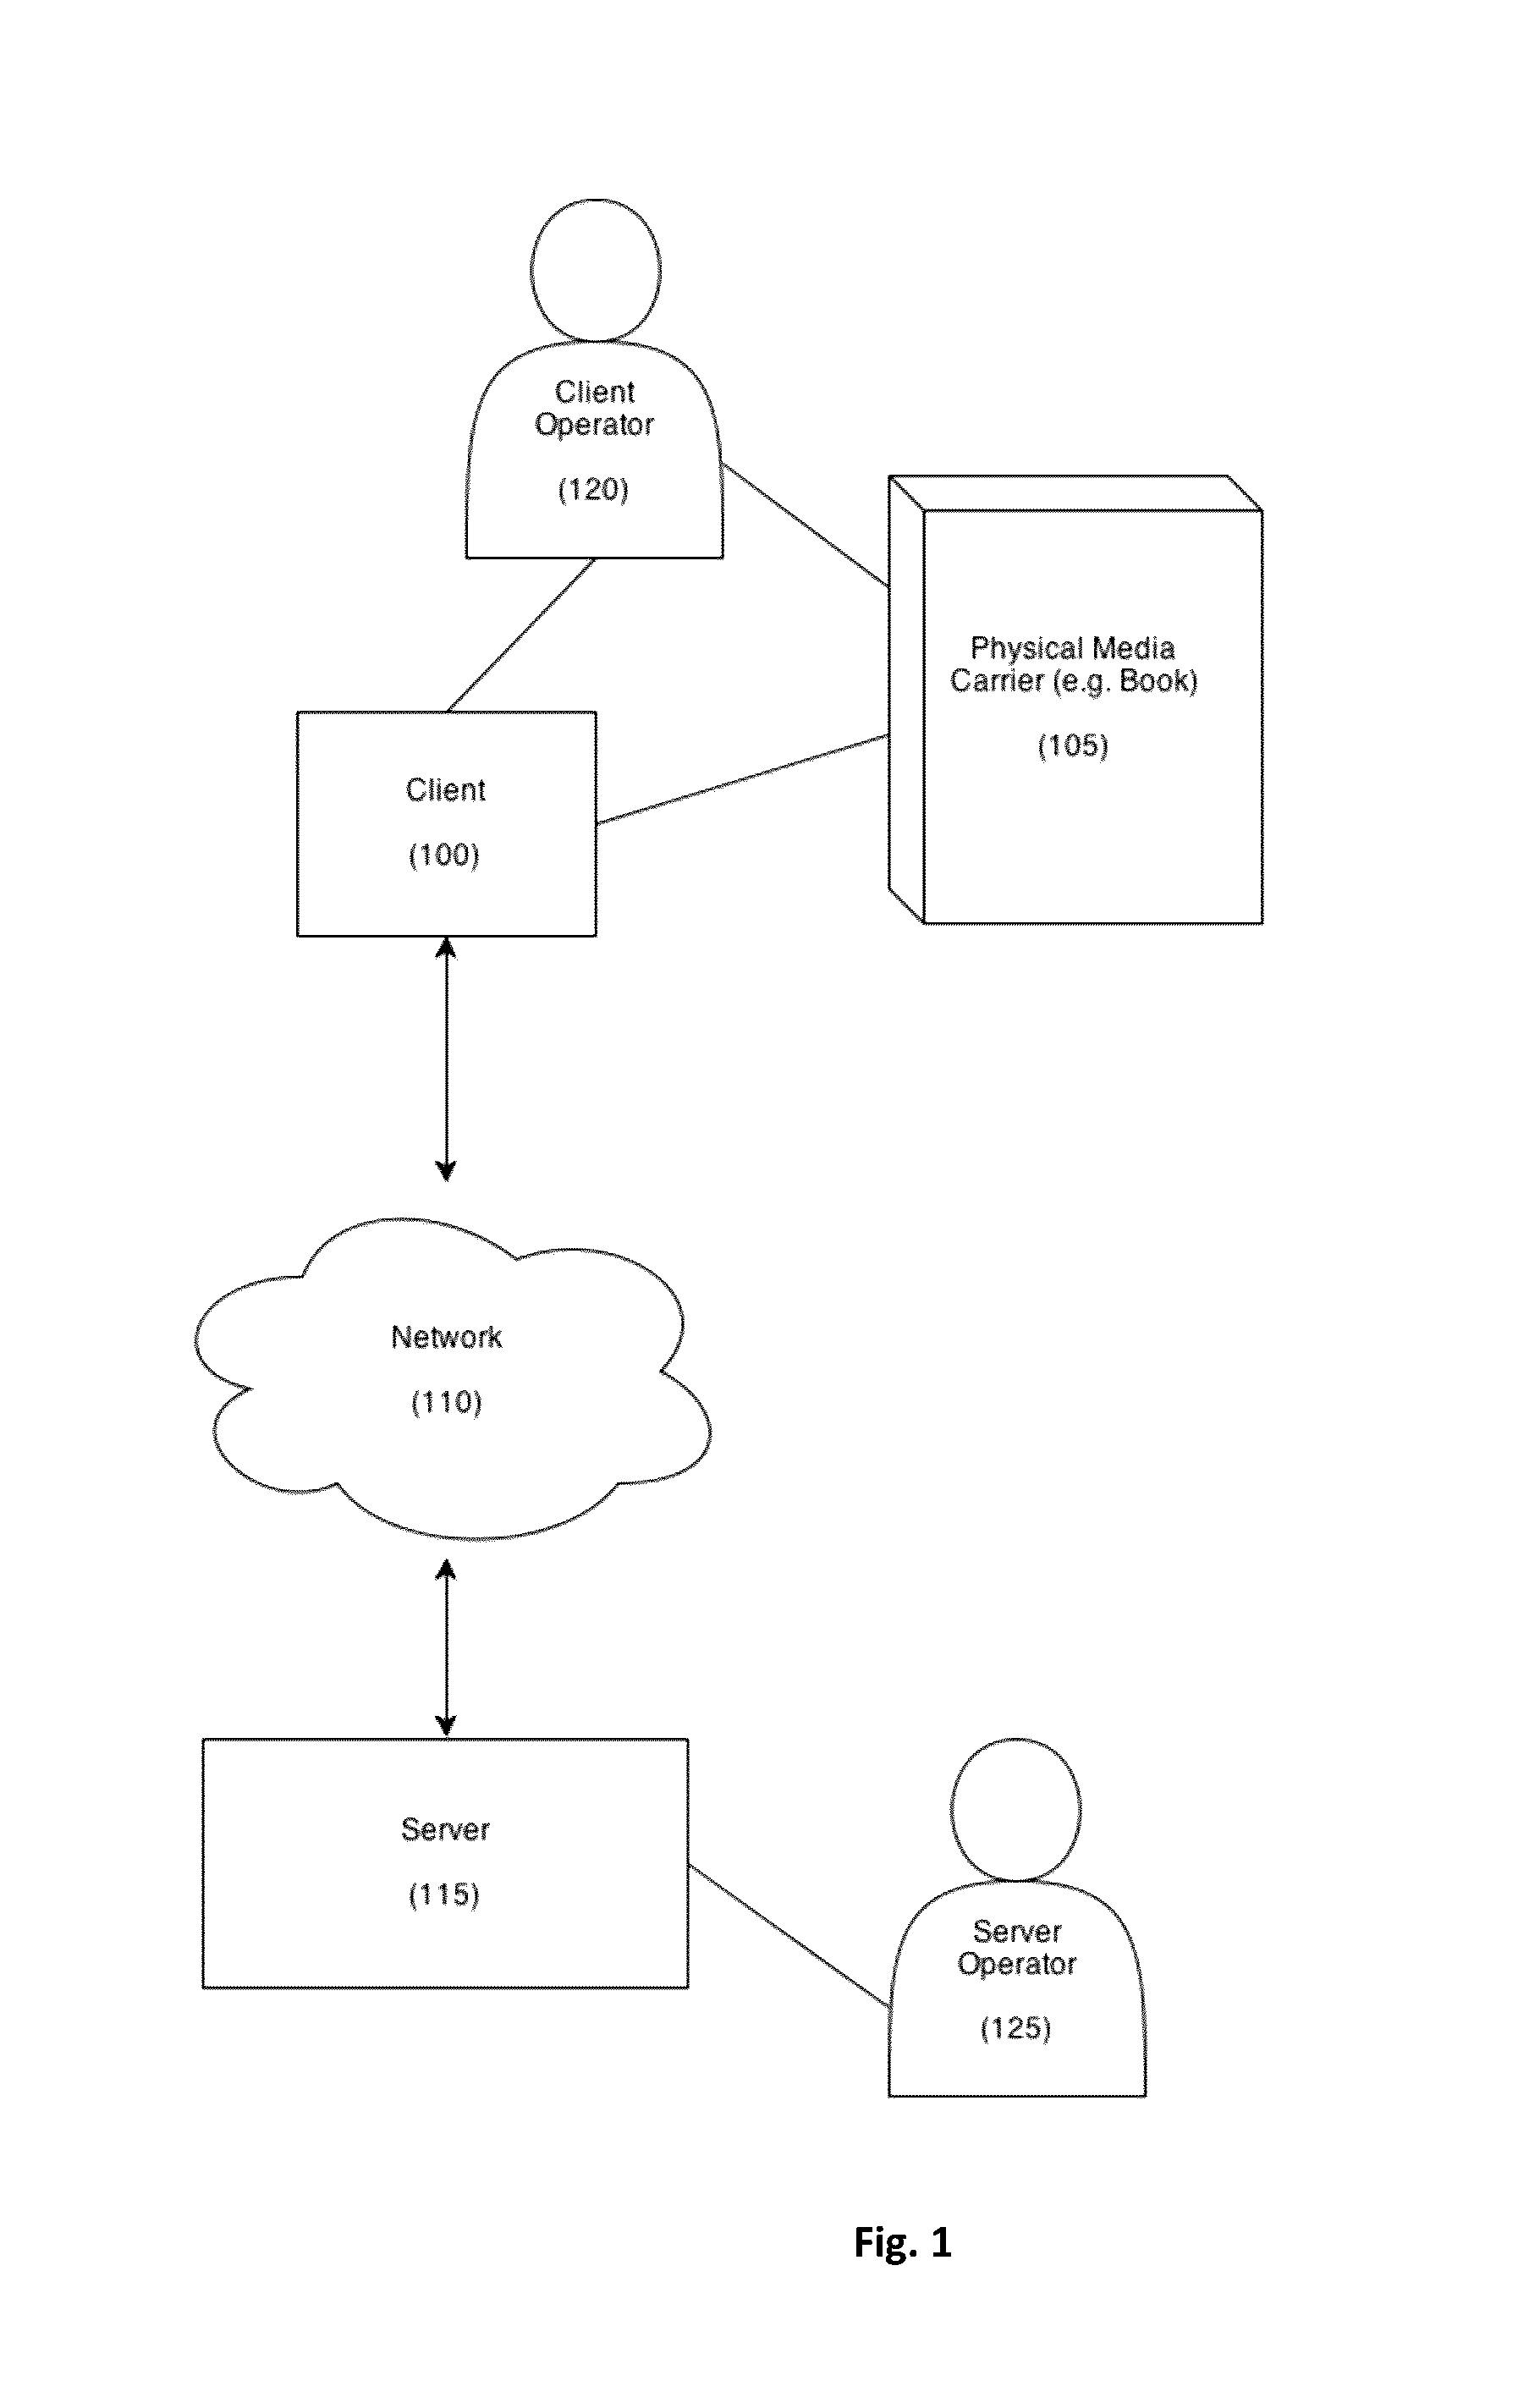 Methods and systems for verifying ownership of a physical work or facilitating access to an electronic resource associated with a physical work